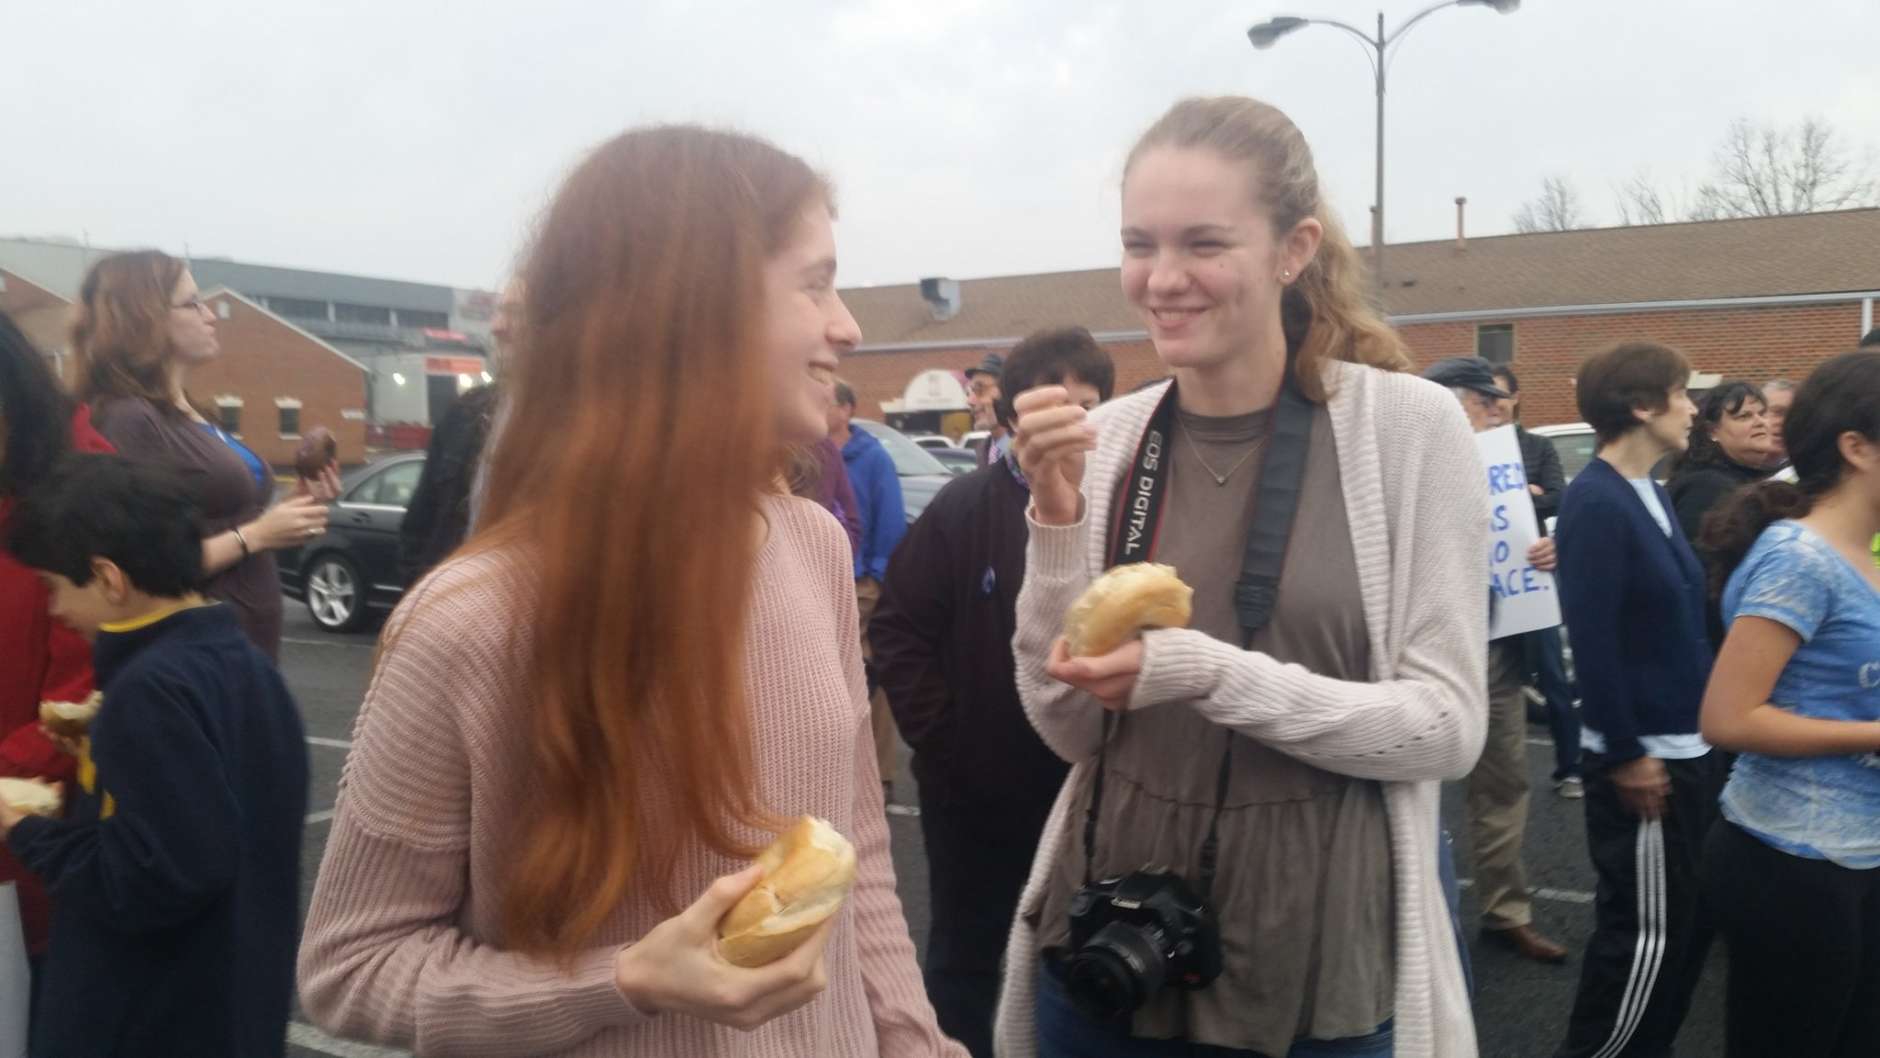 Tenth graders Emily Schrader and Anna O'Keefe at Wednesday's Bagels Not Bombs event. (WTOP/Kathy Stewart)